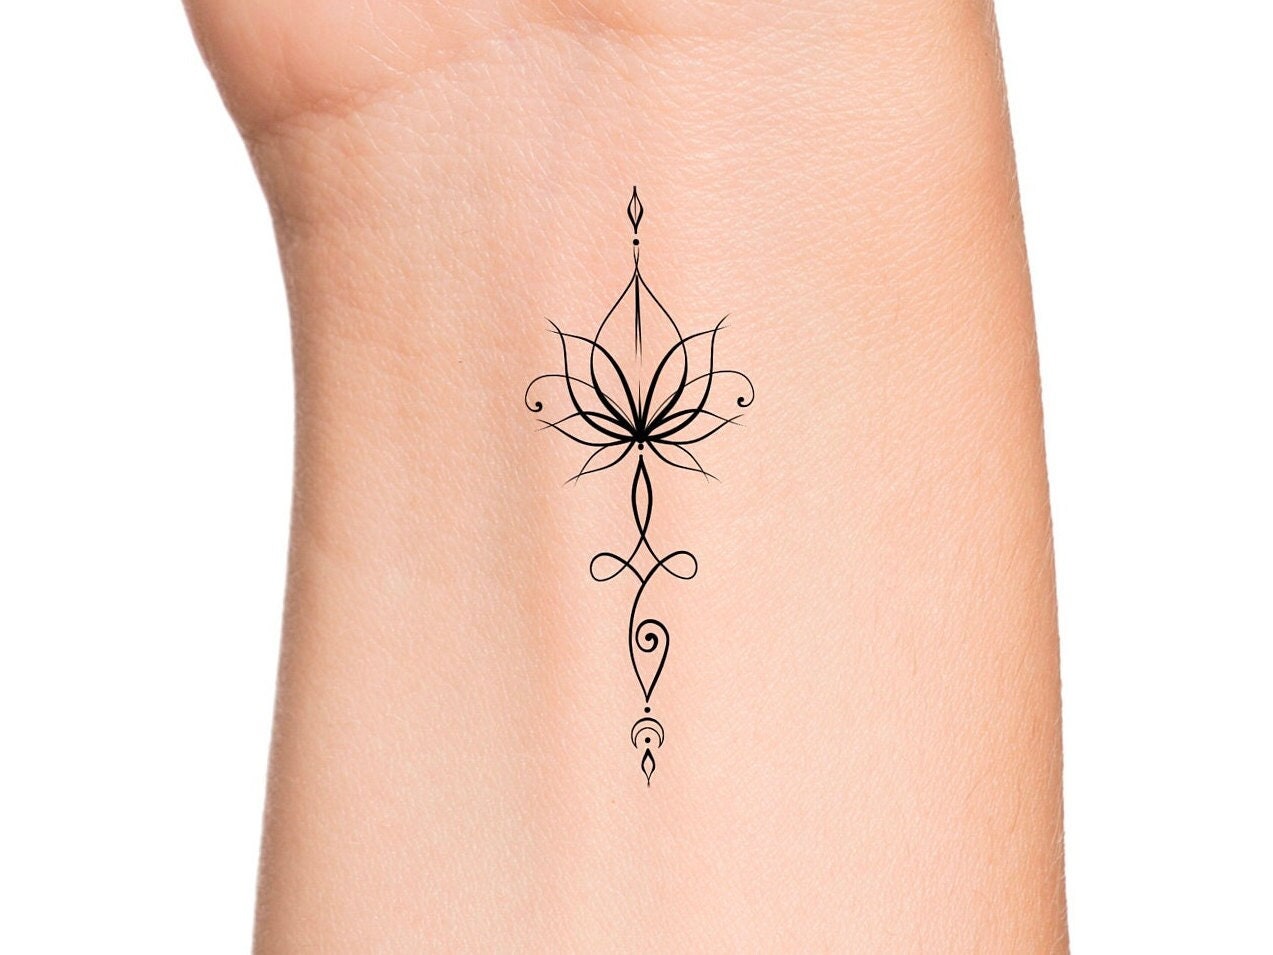 Fine line style unalome temporary tattoo located on the-cheohanoi.vn